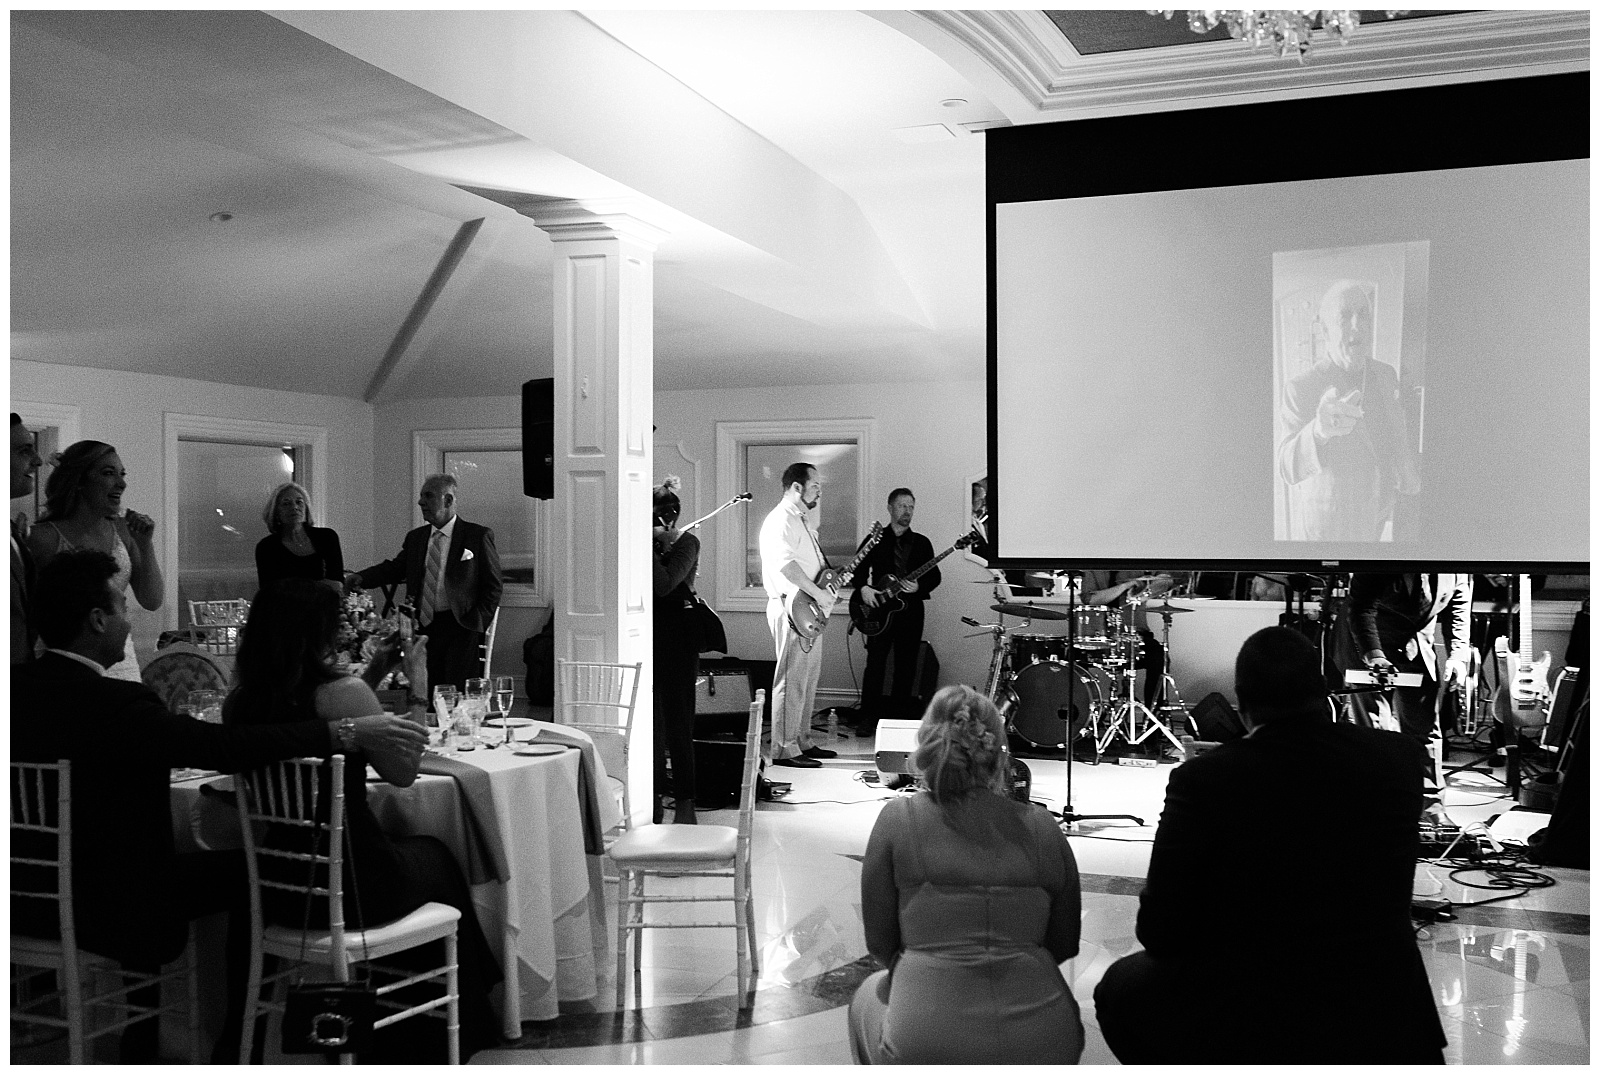 A video message for the bride and groom, recorded by wrestler Ric Flair Nature Boy is played during the reception.